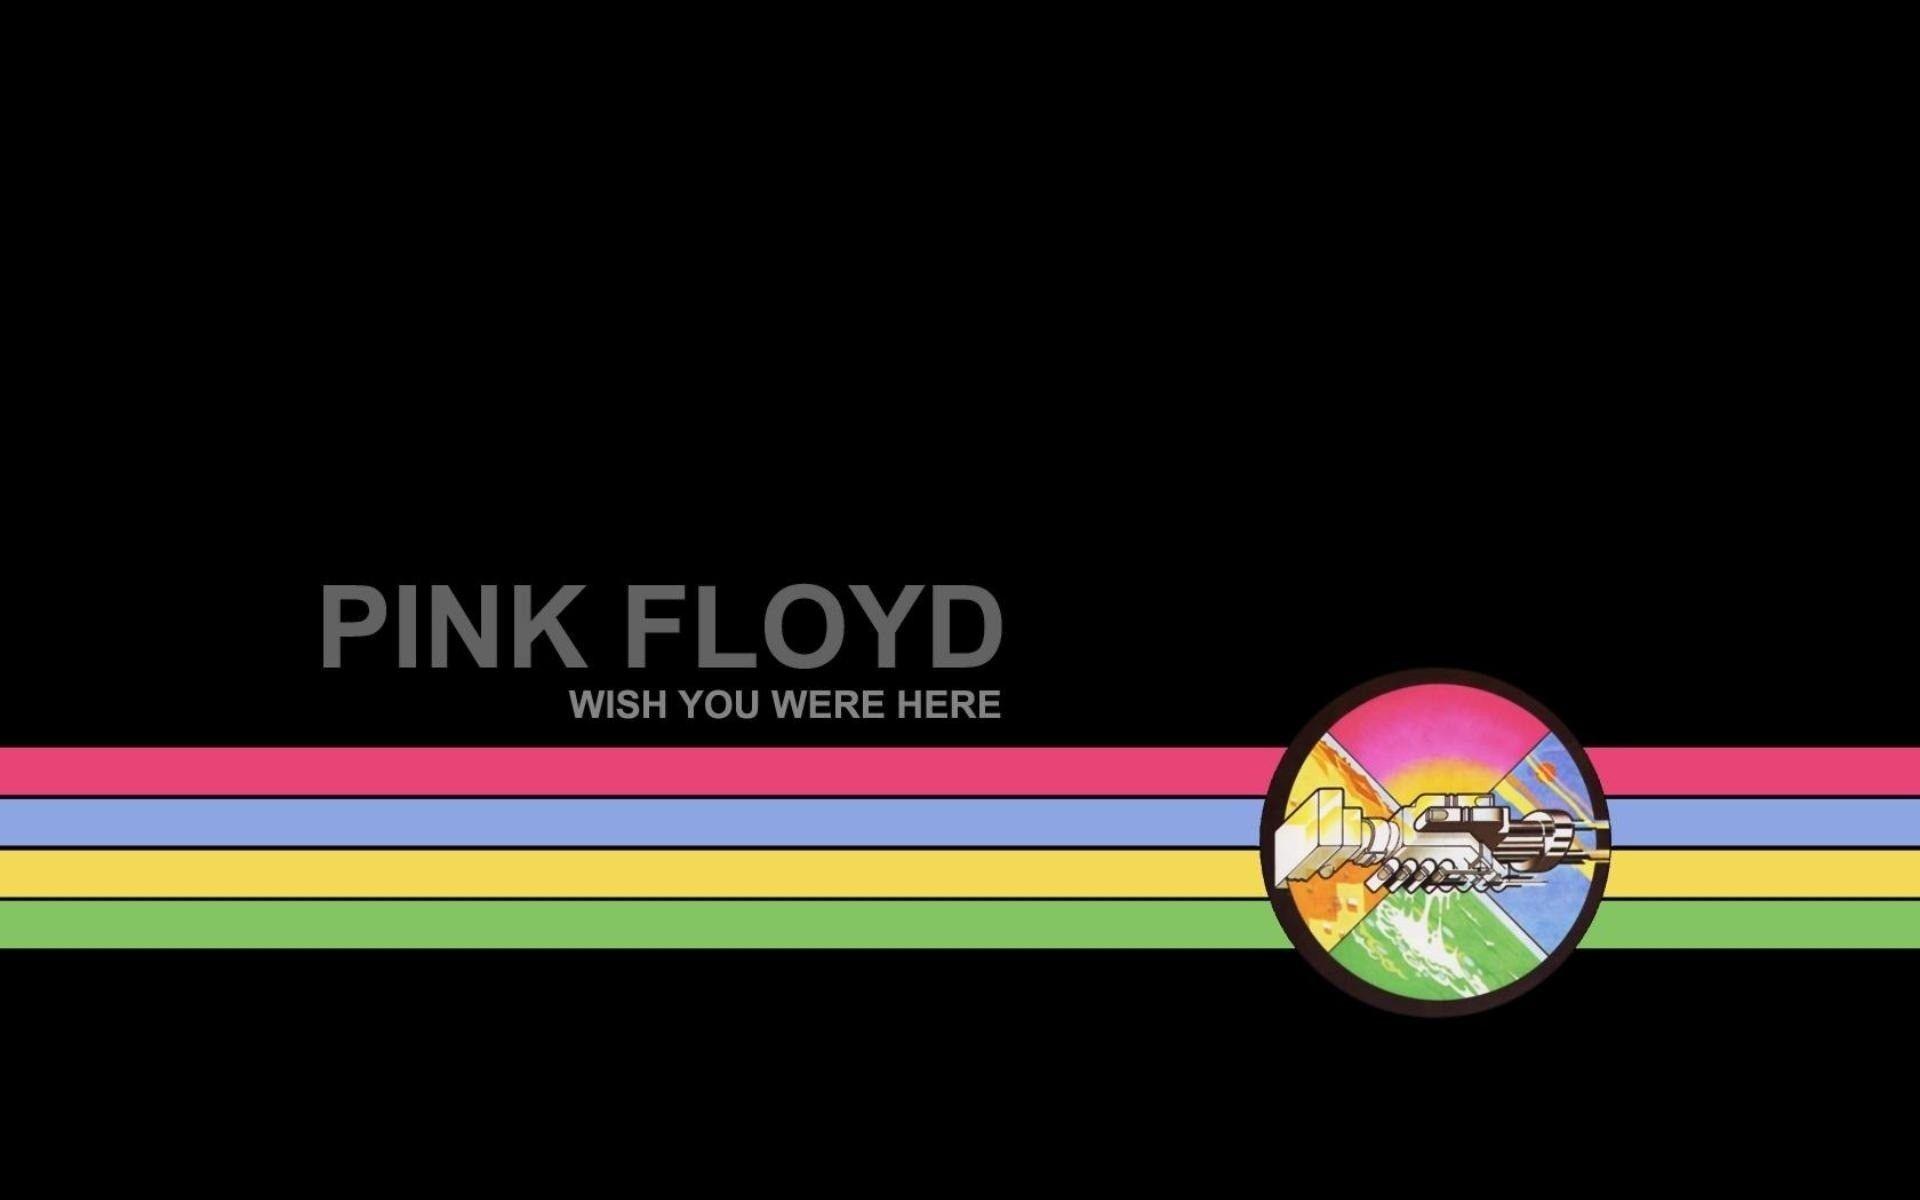 Pink Floyd Logo. Android wallpaper for free